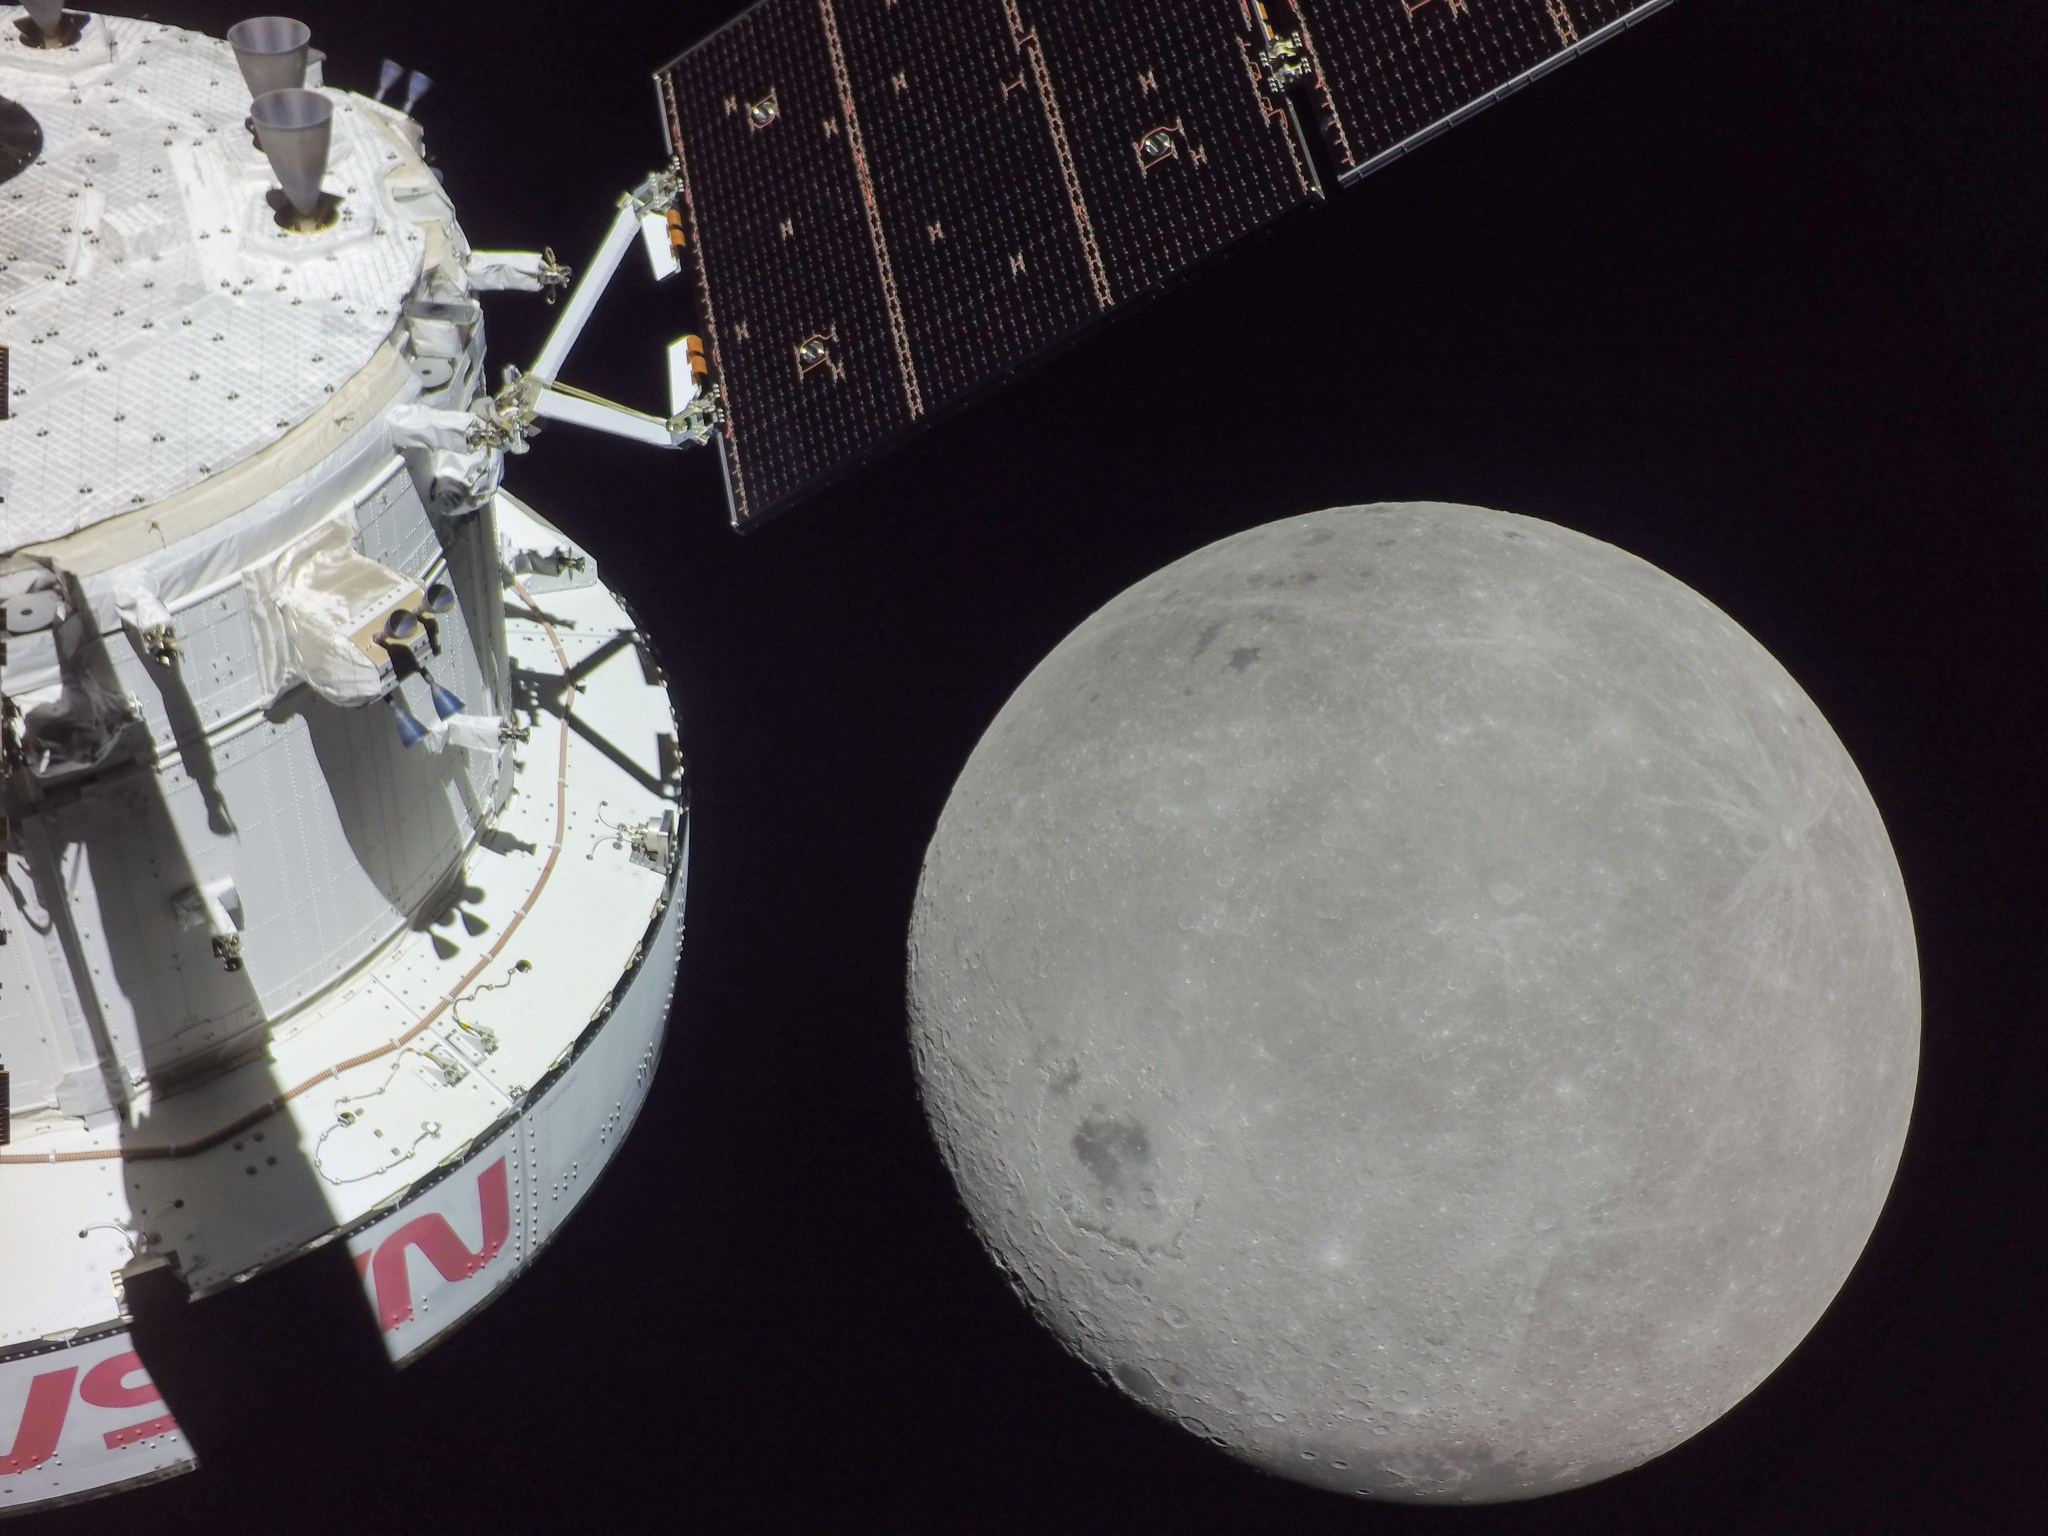 The grey, circular Moon is seen as the Orion spacecraft approaches it. The back end of the service module, including a solar array wing, and red NASA lettering can be seen. 